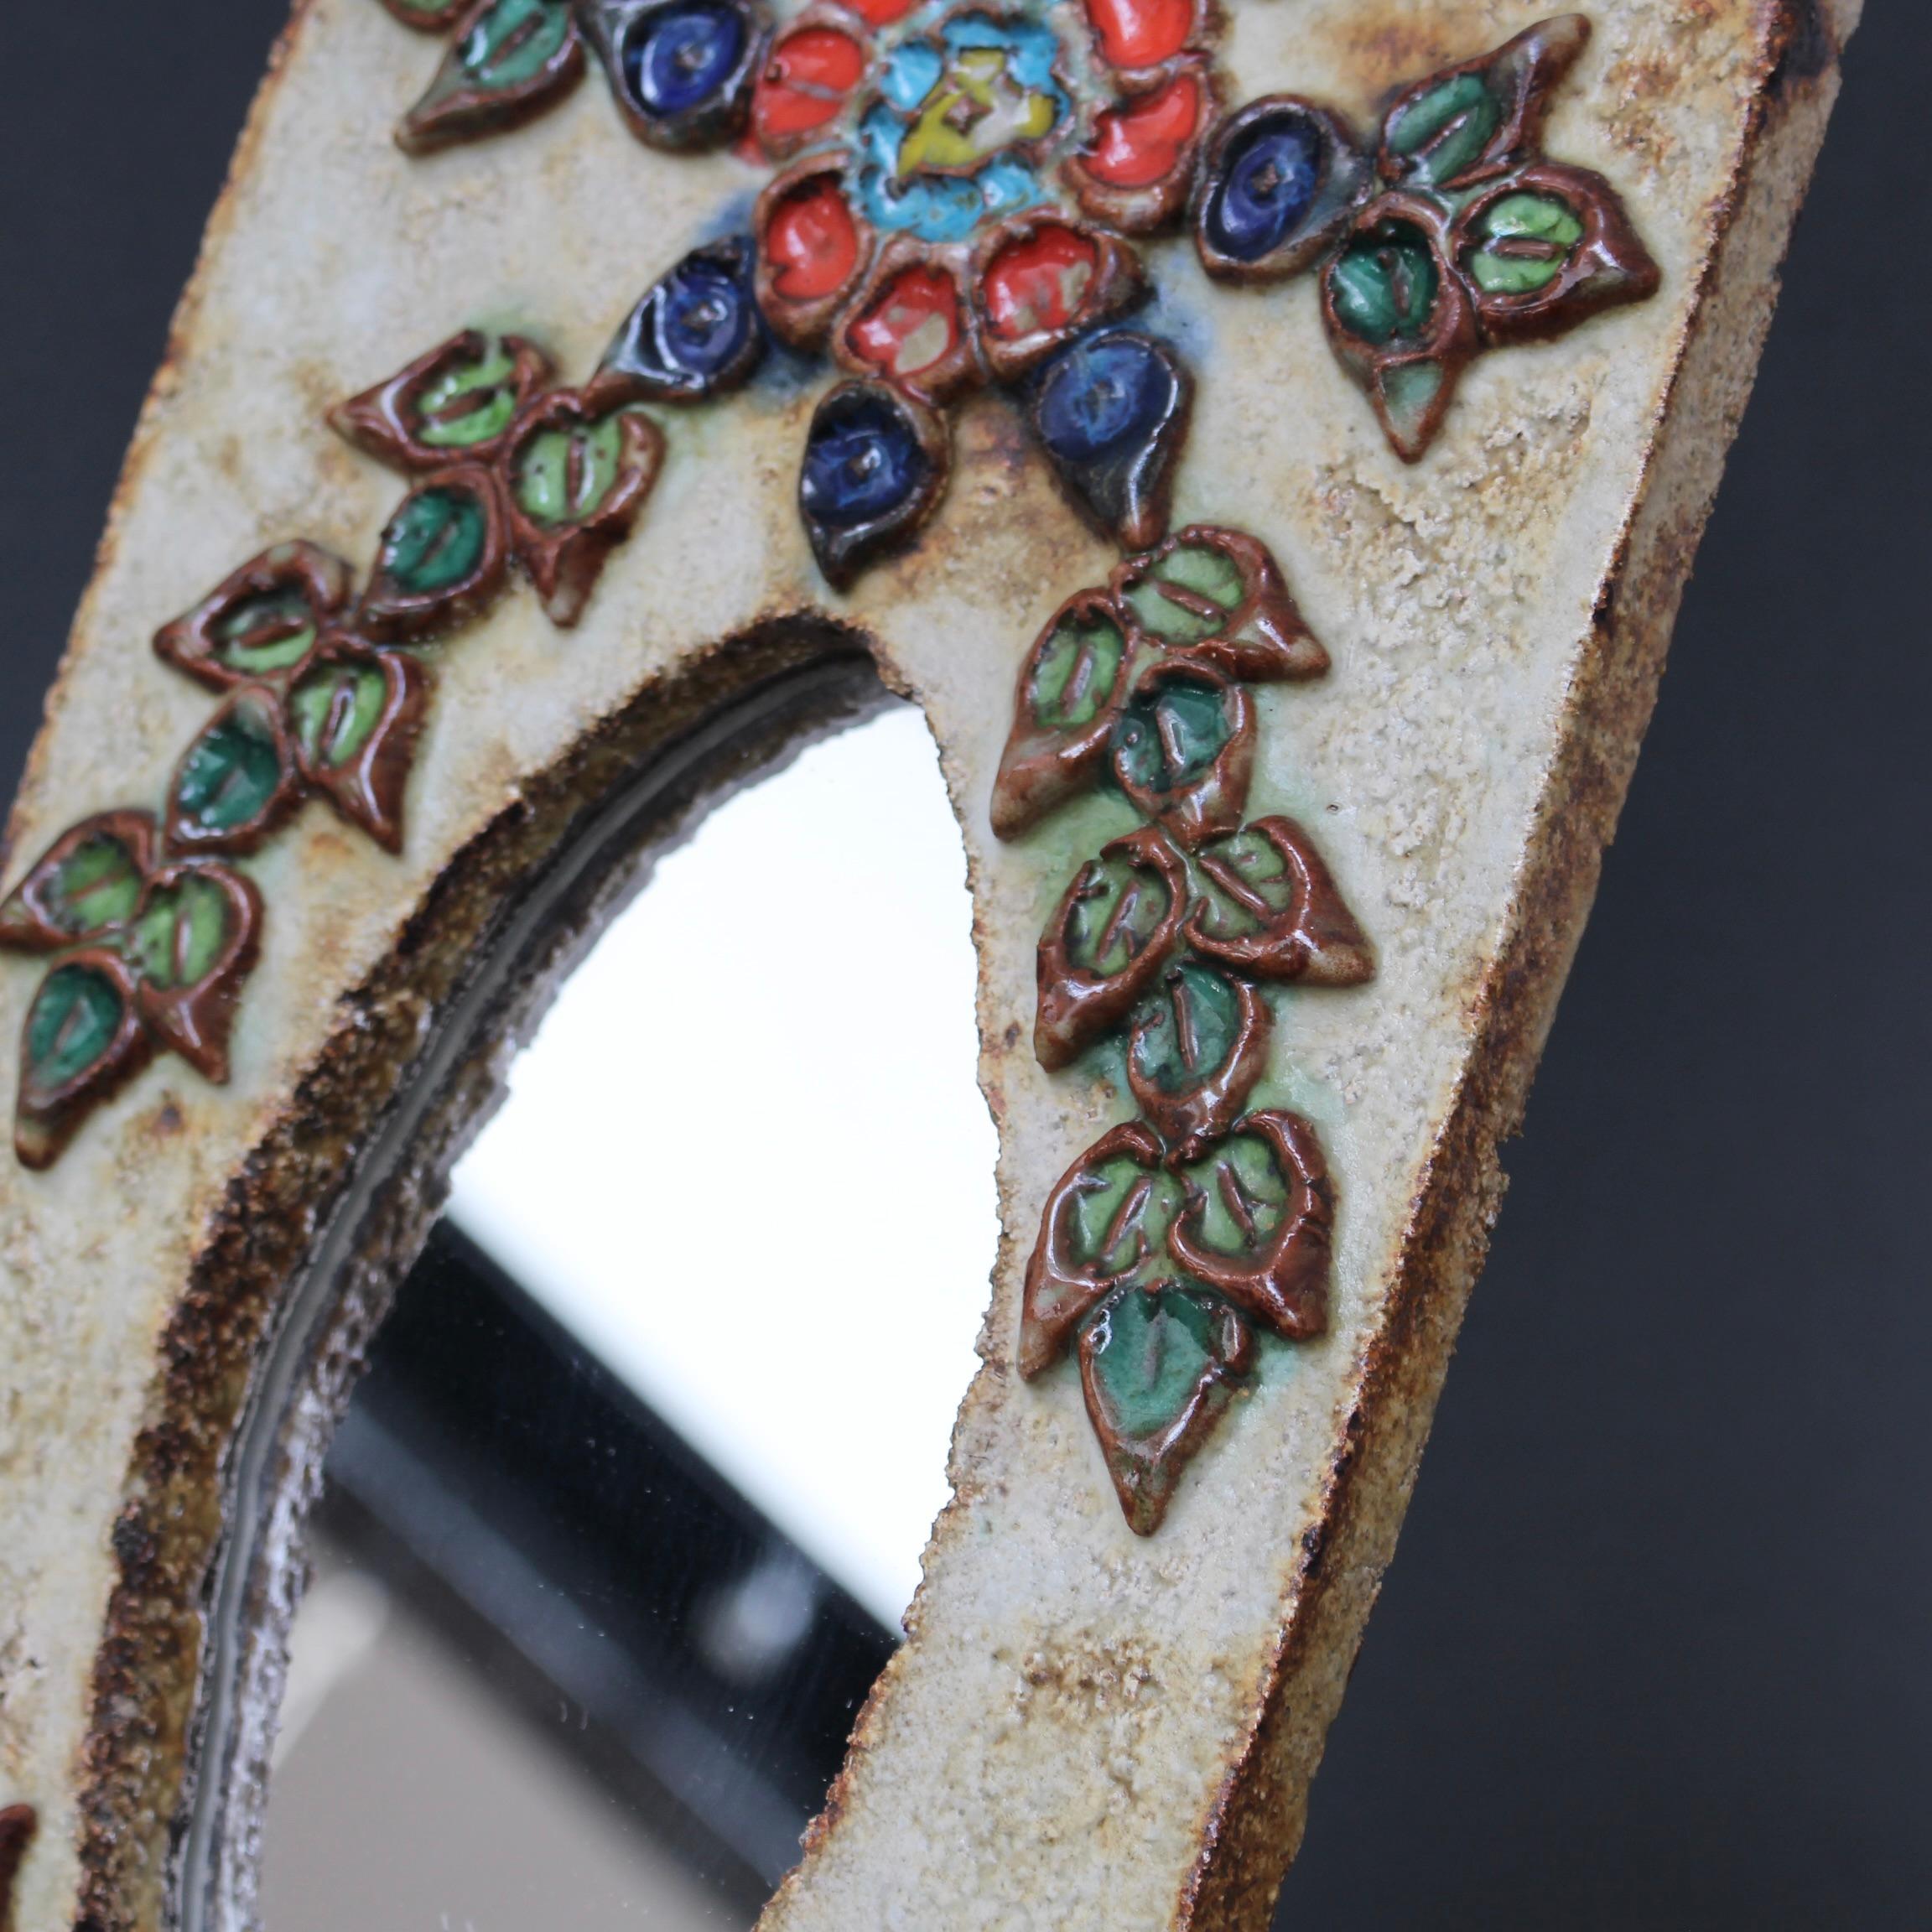 Vintage French Ceramic Wall Mirror with Flower Motif by La Roue, 'circa 1960s' For Sale 6